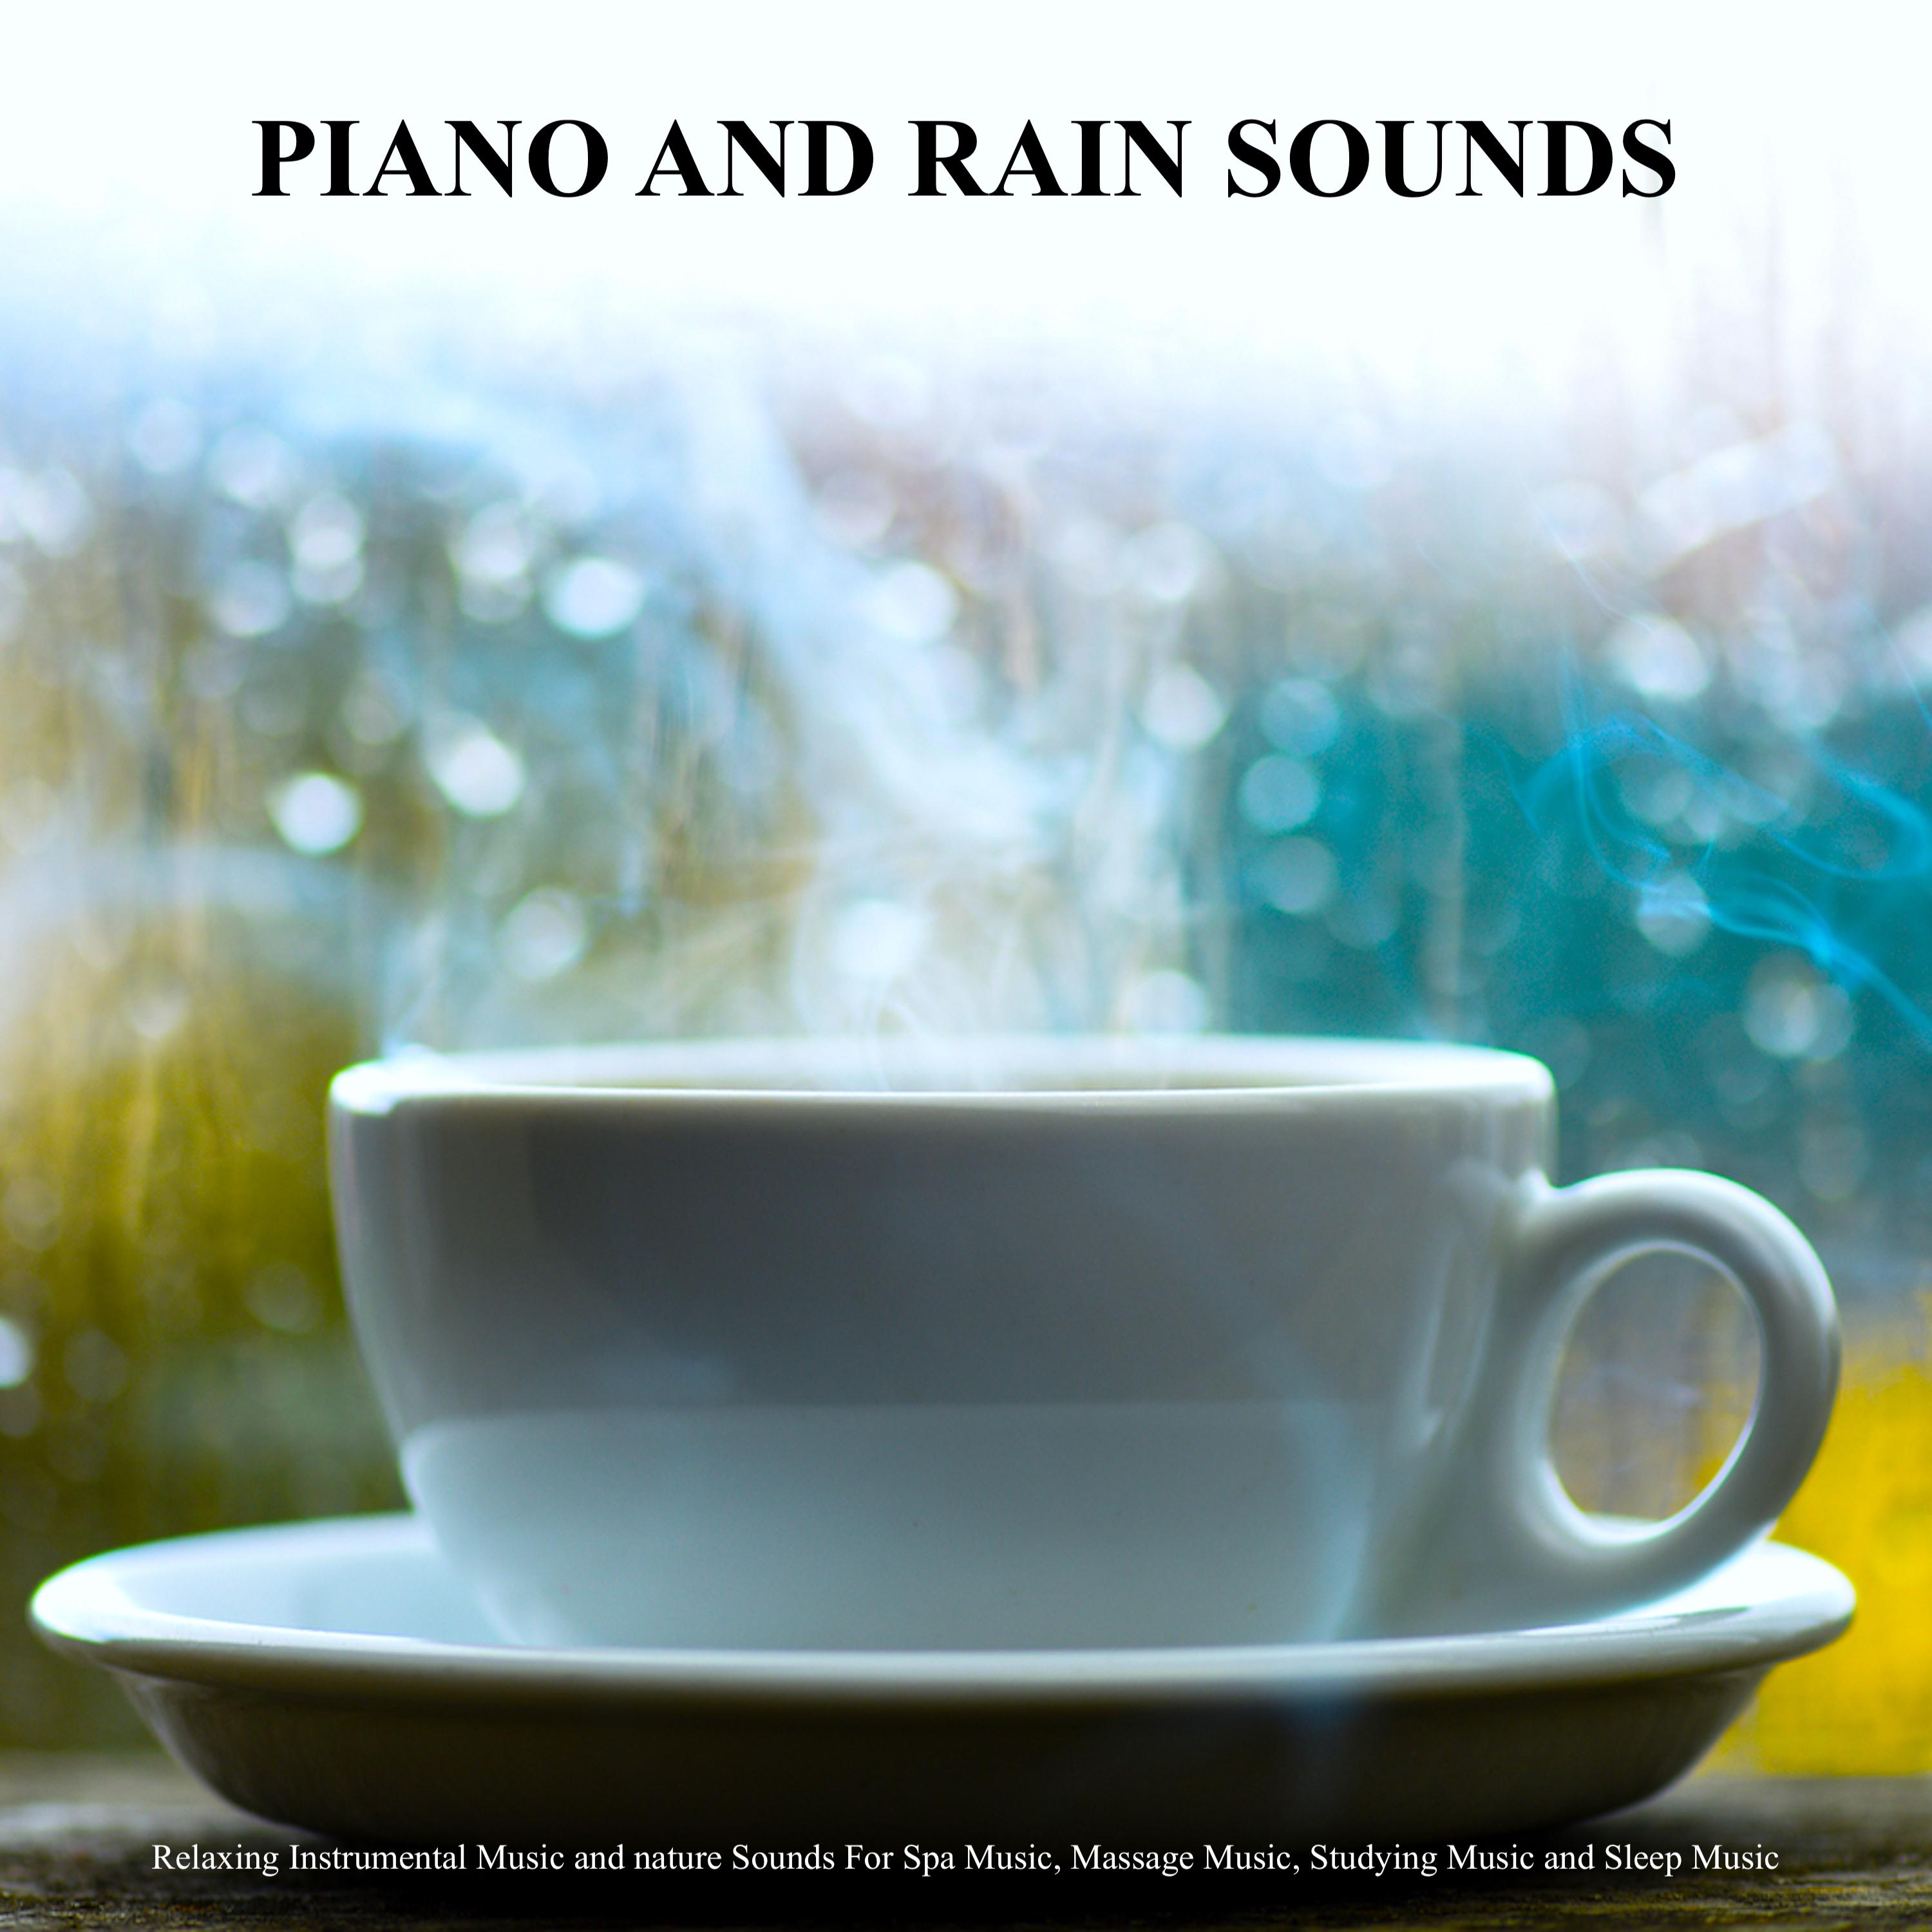 Background Relaxation Piano Music with Rain Sounds